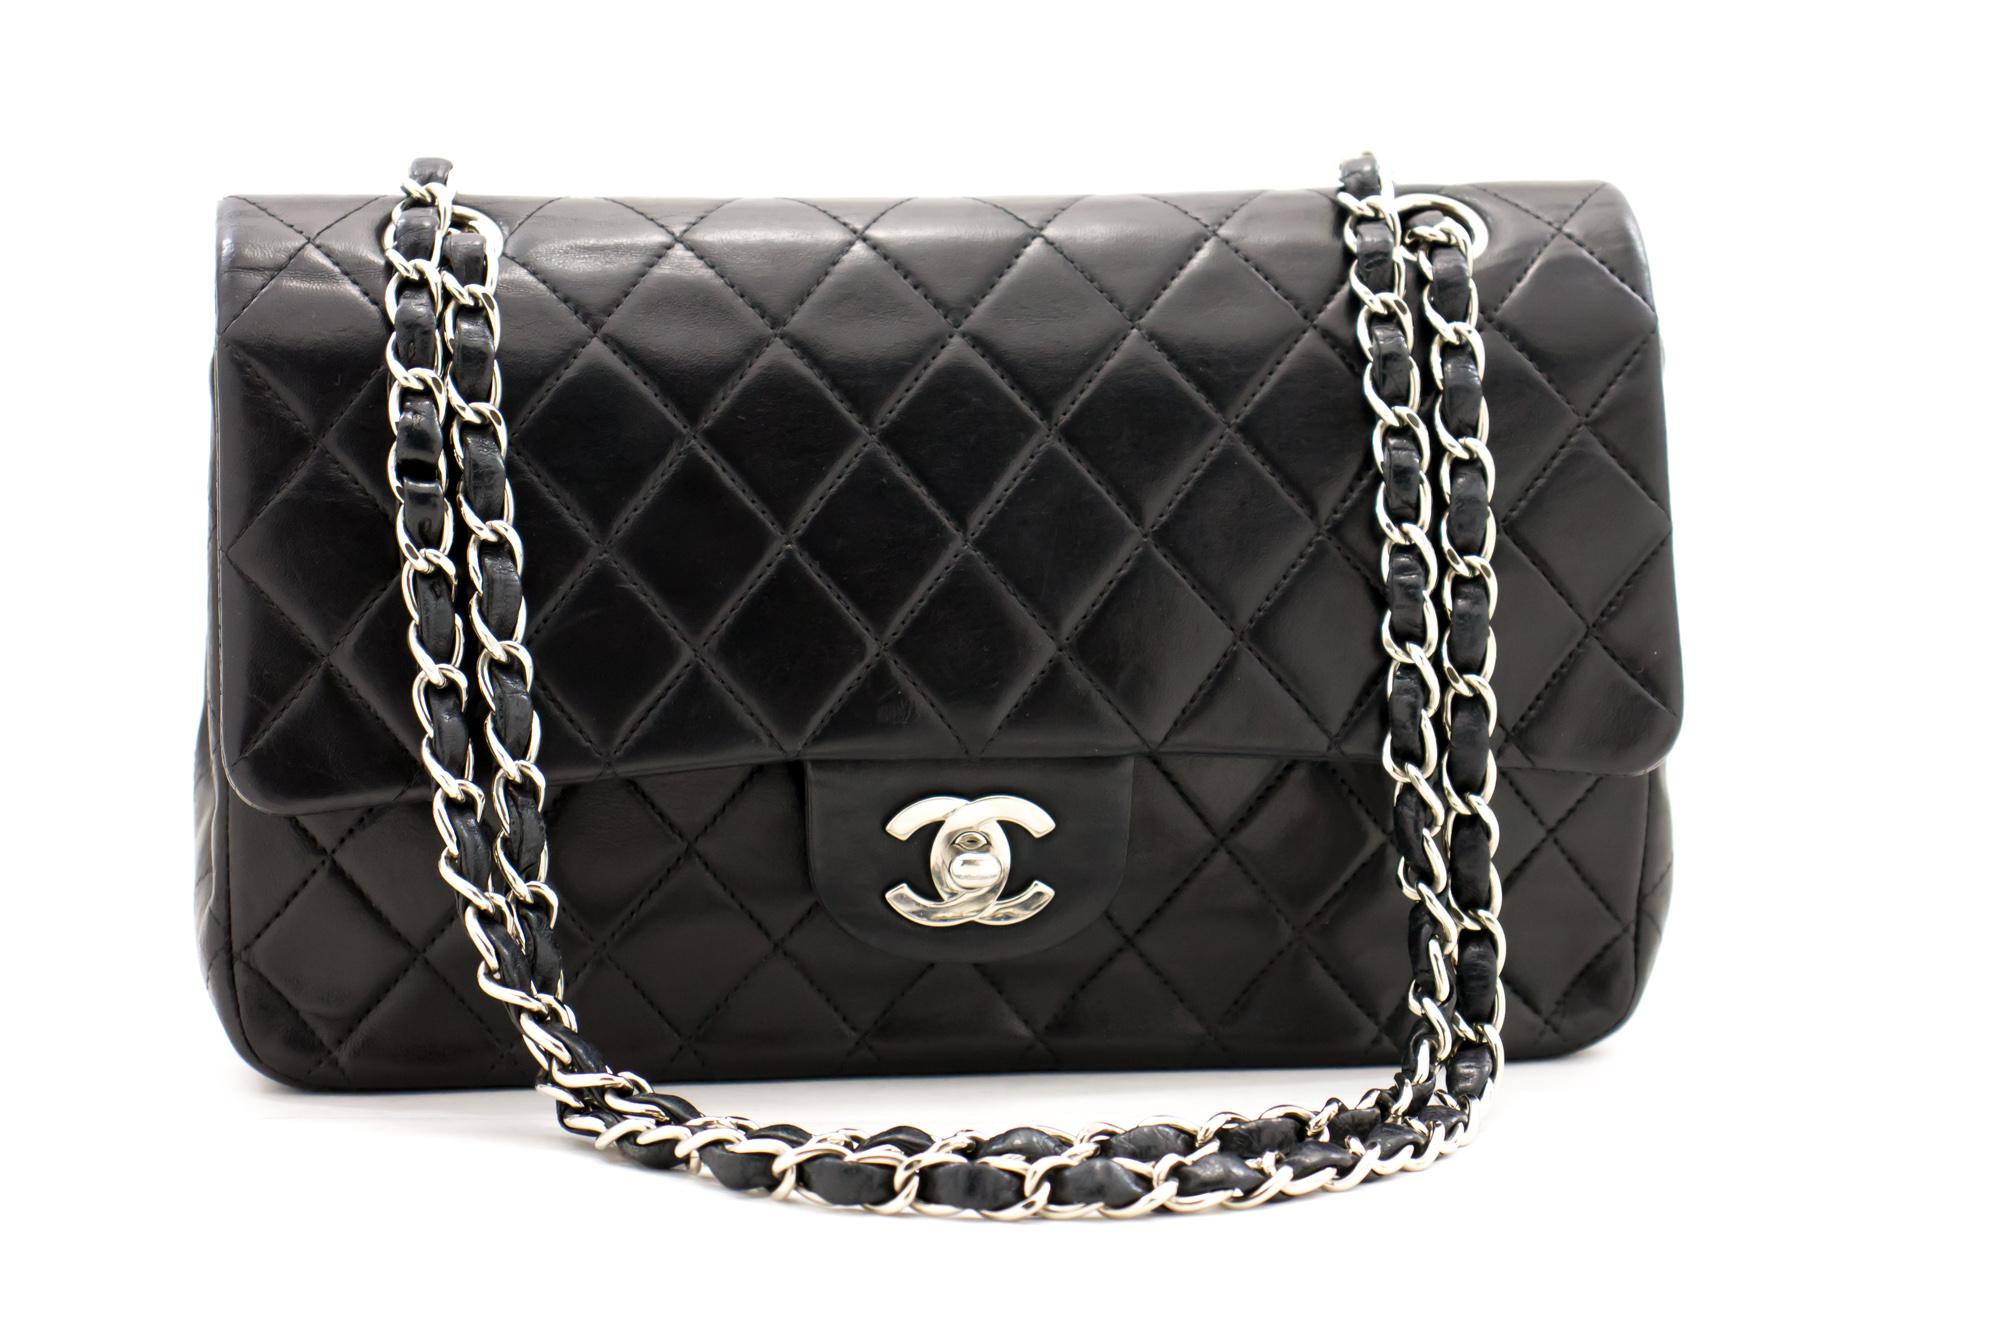 An authentic CHANEL 2.55 Classic Double Flap Medium Silver Chain Shoulder Bag Black. The color is Black. The outside material is Leather. The pattern is Solid. This item is Contemporary. The year of manufacture would be 2000-2 0 0 2 .
Conditions &